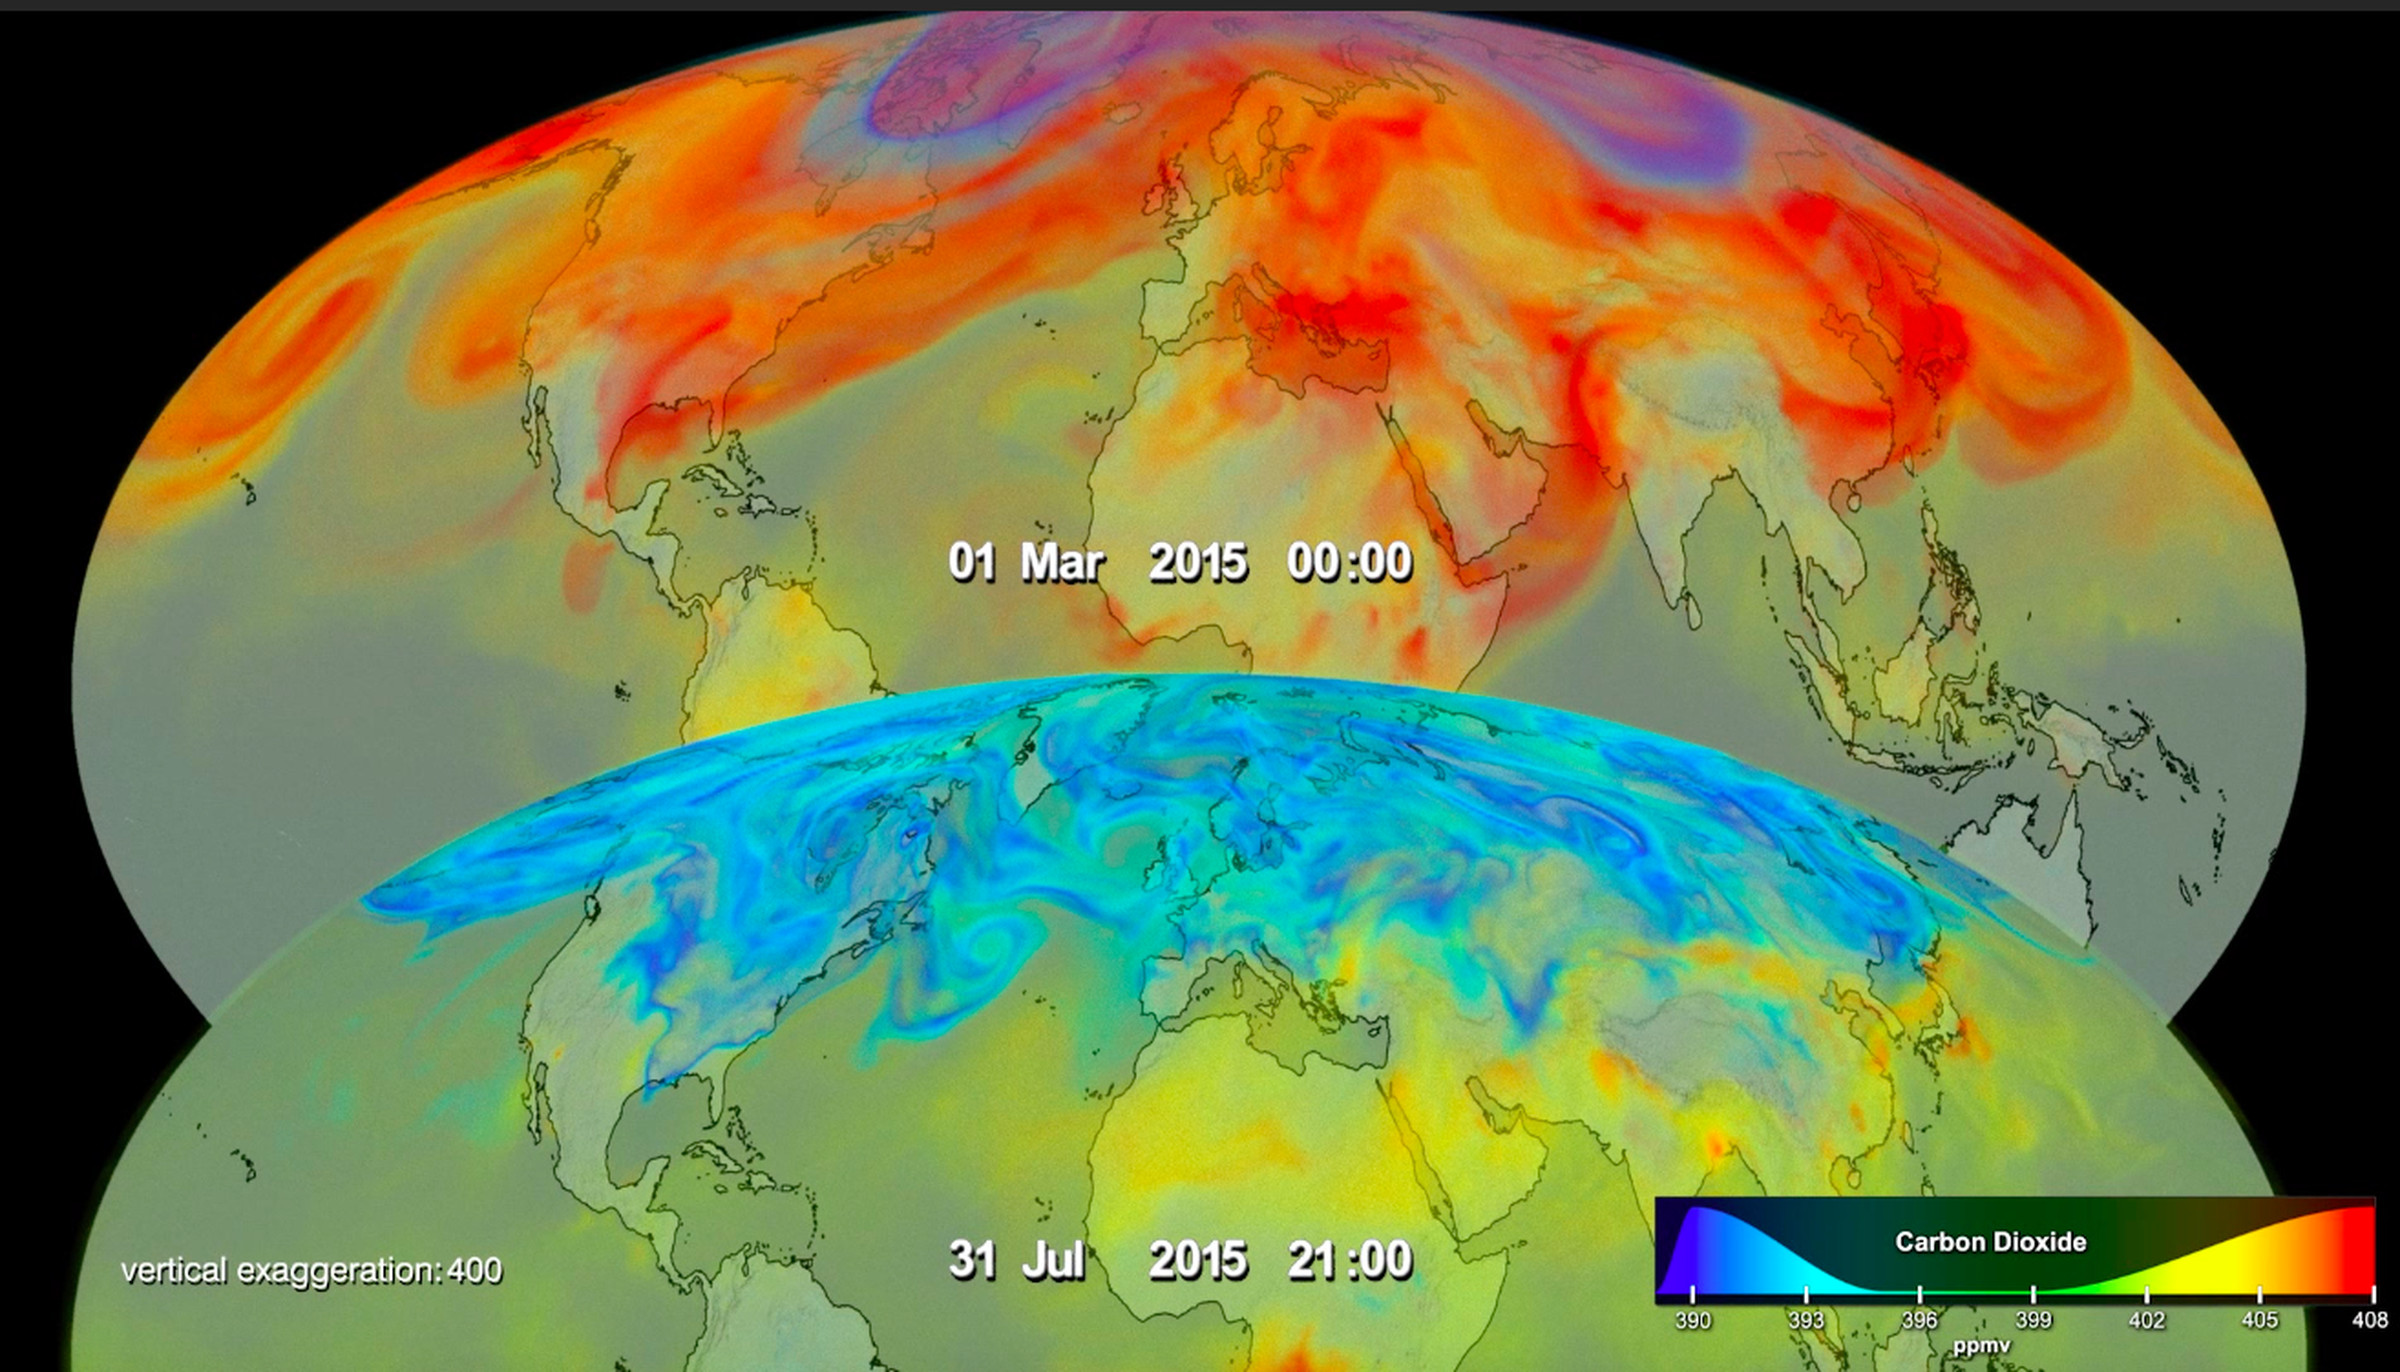 This map shows how CO2 concentrations in the Northern Hemisphere change dramatically from season to season.